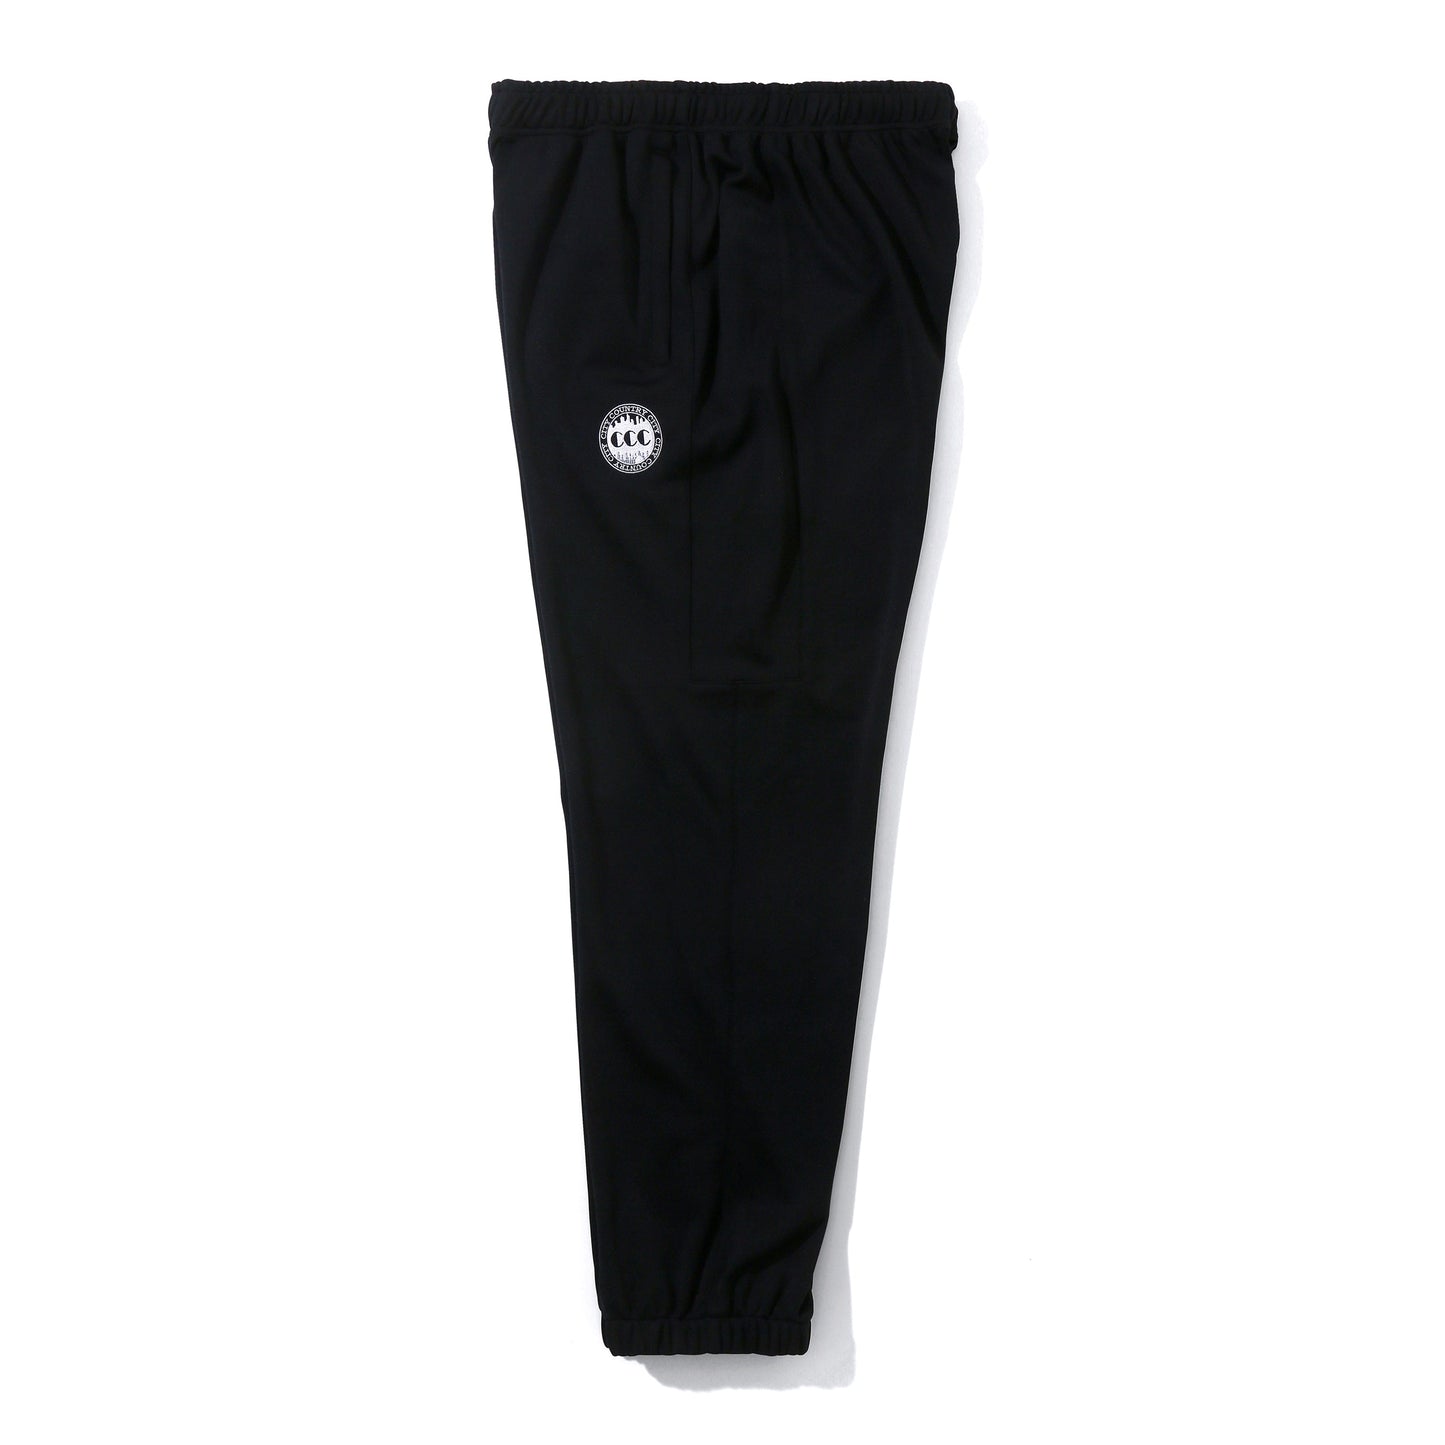 EMBROIDERED LOGO SWITCHING TRACK PANTS